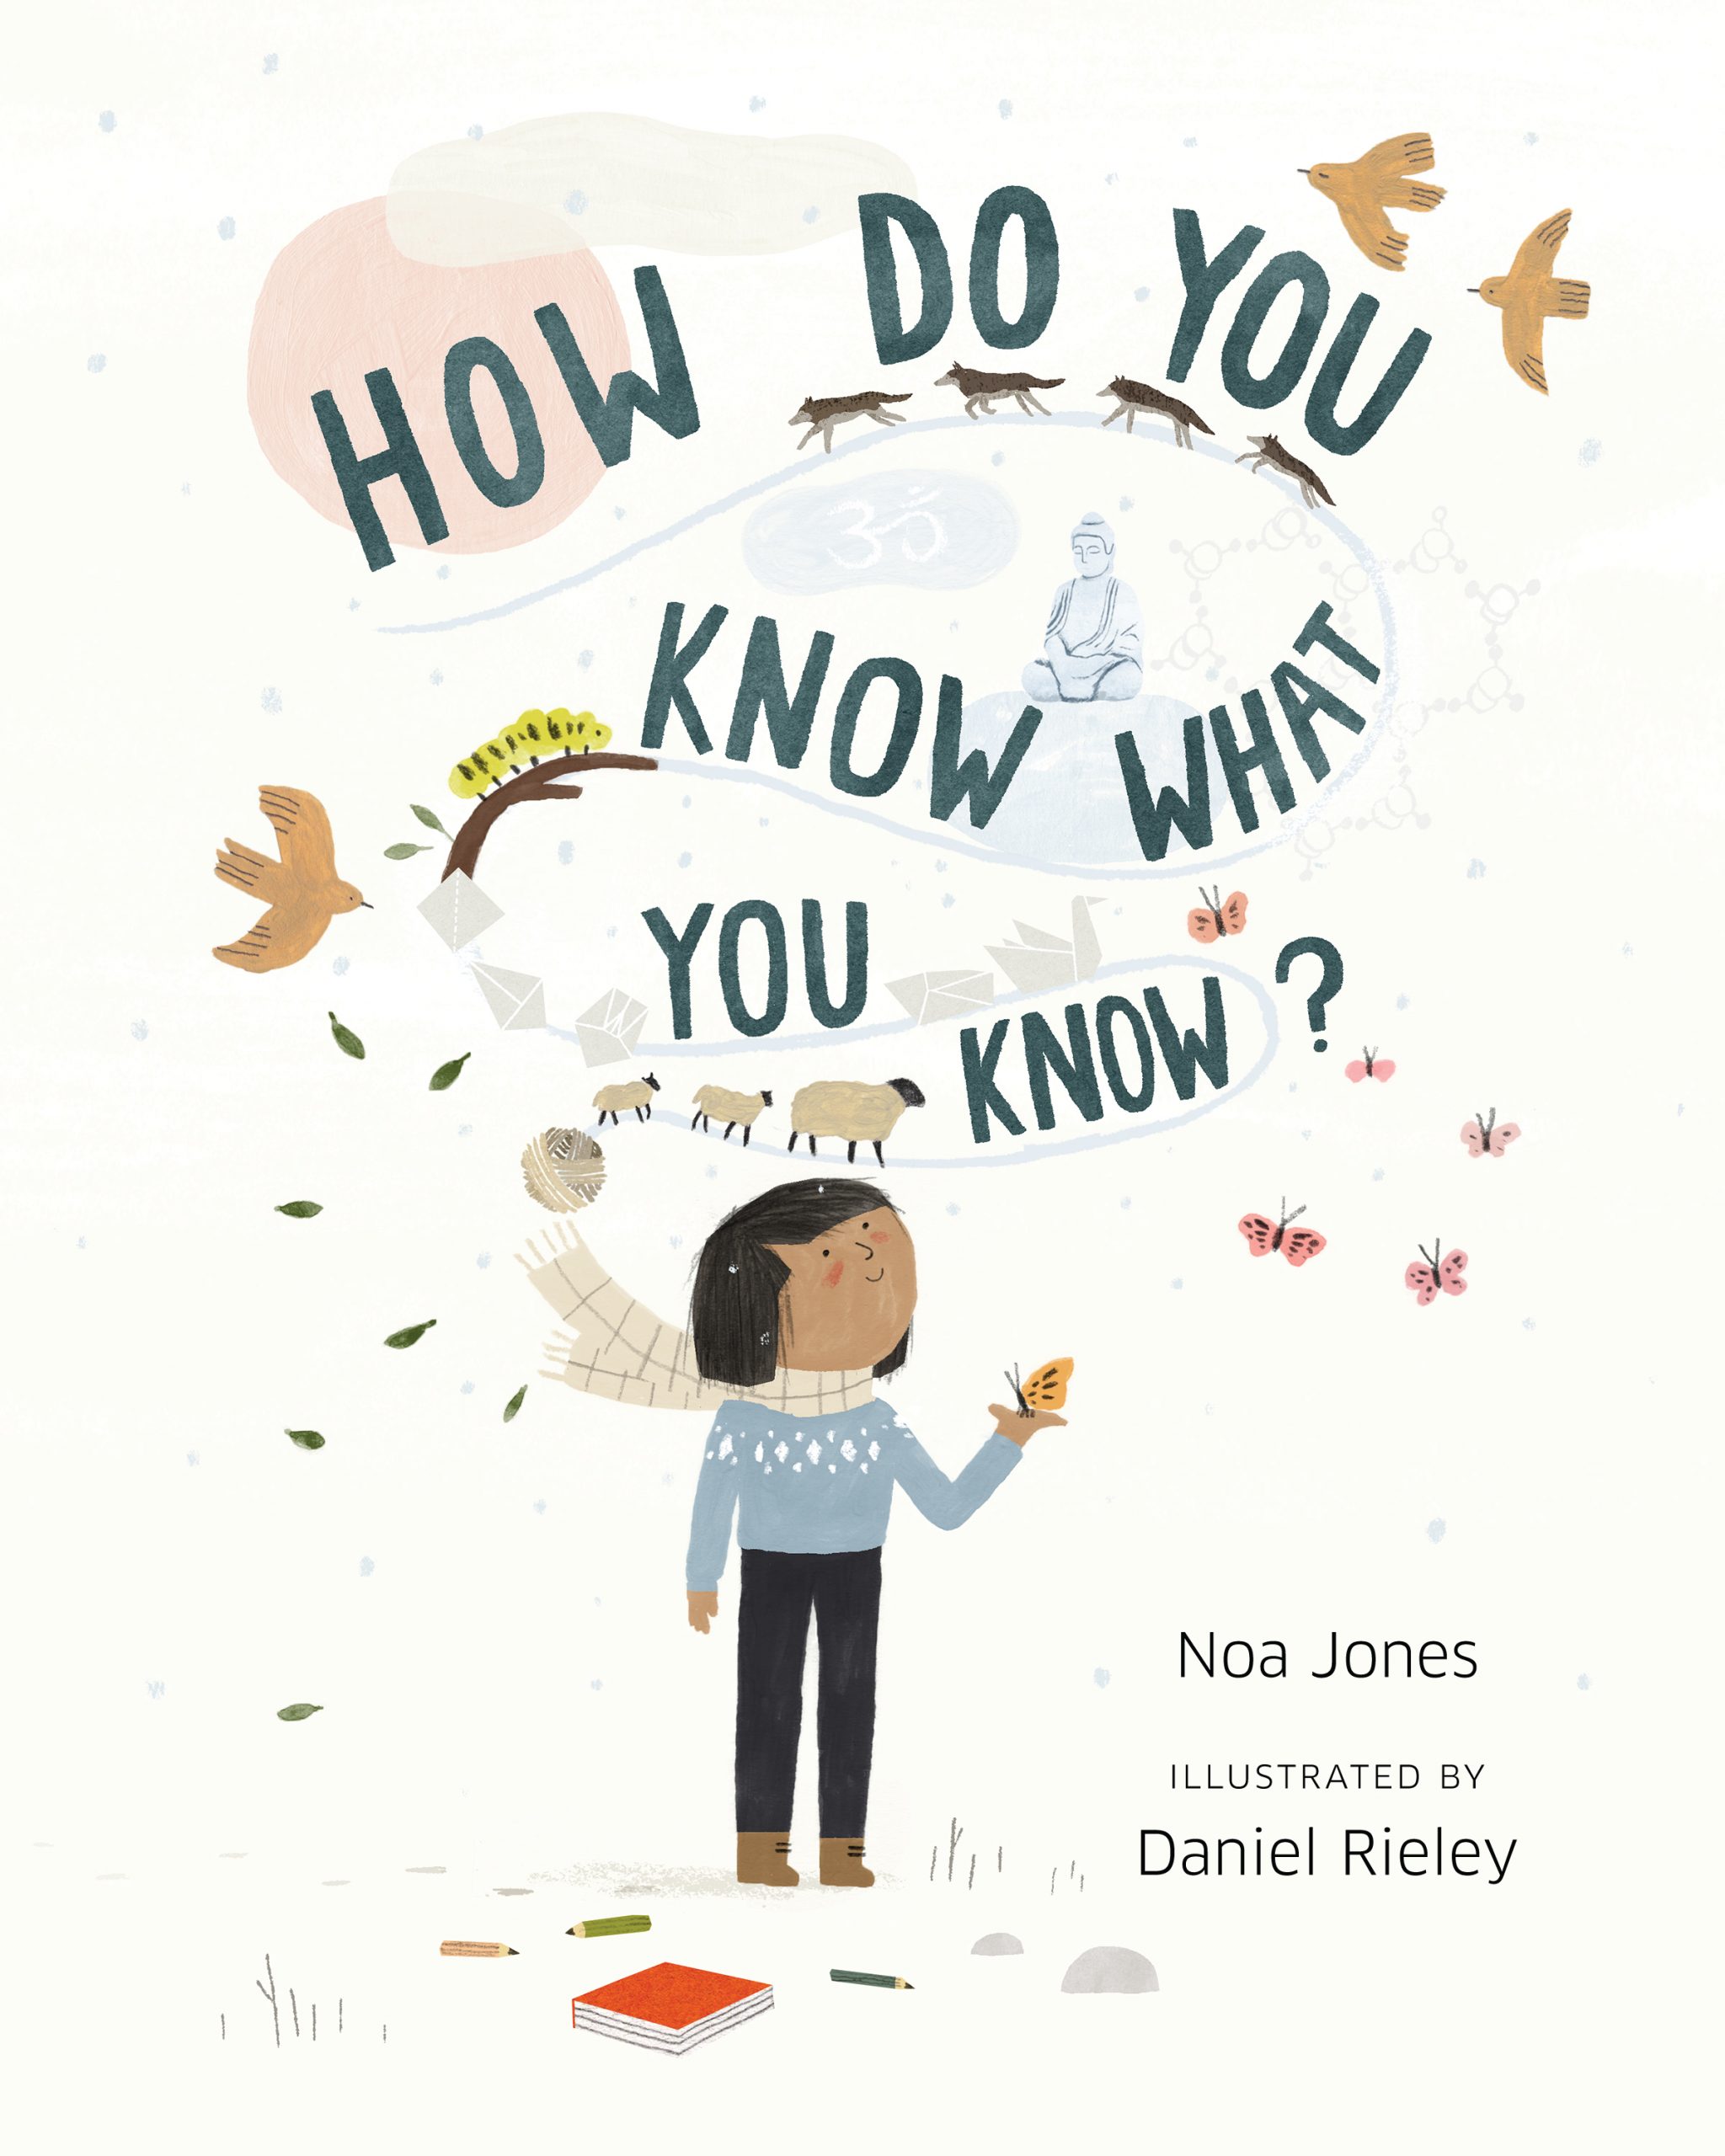 How Do You Know What You Know?